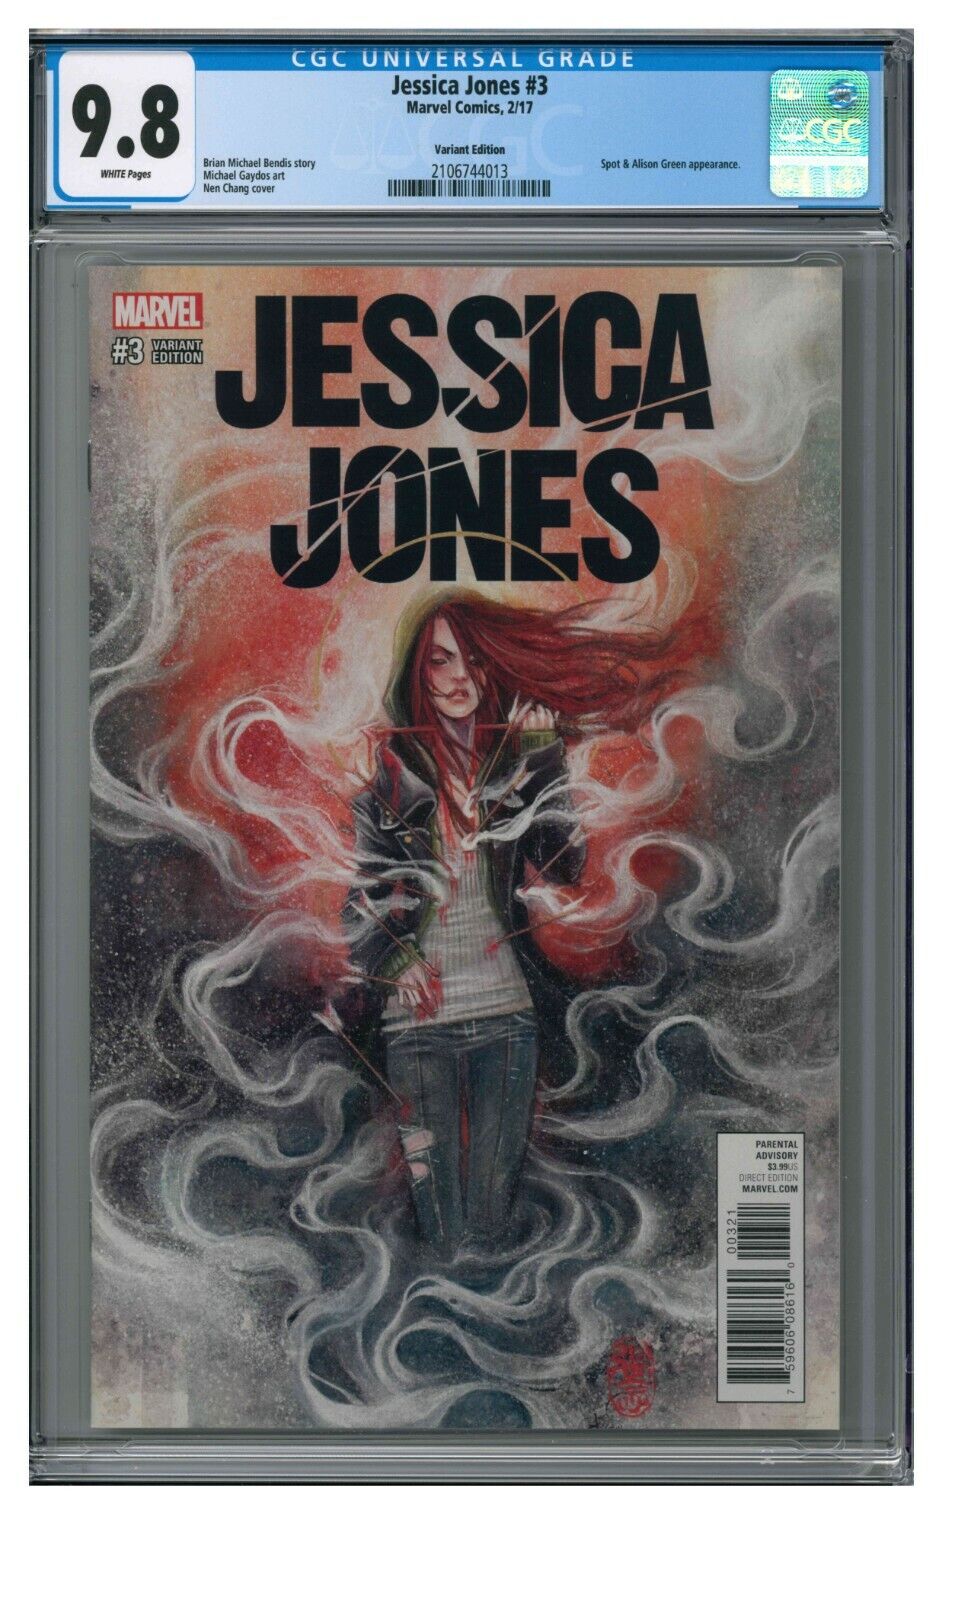 Jessica Jones #3 (2017) Nen Chang Variant Cover CGC 9.8 White Pages GG544